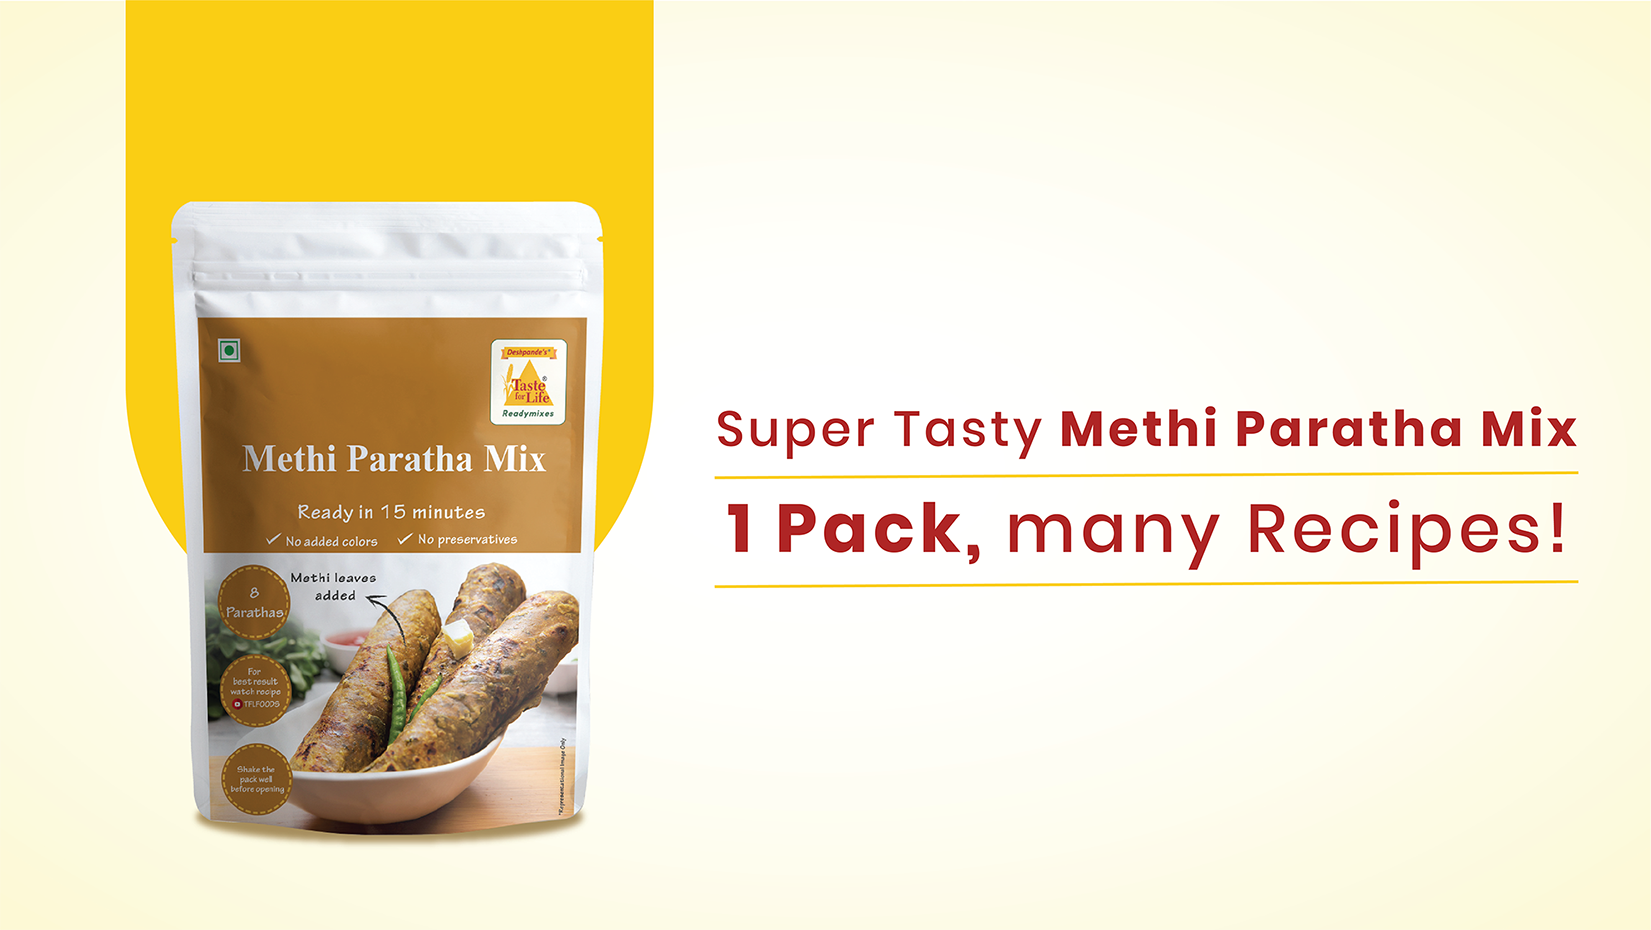 Methi Paratha Mix: An Essential Addition to Every Kitchen